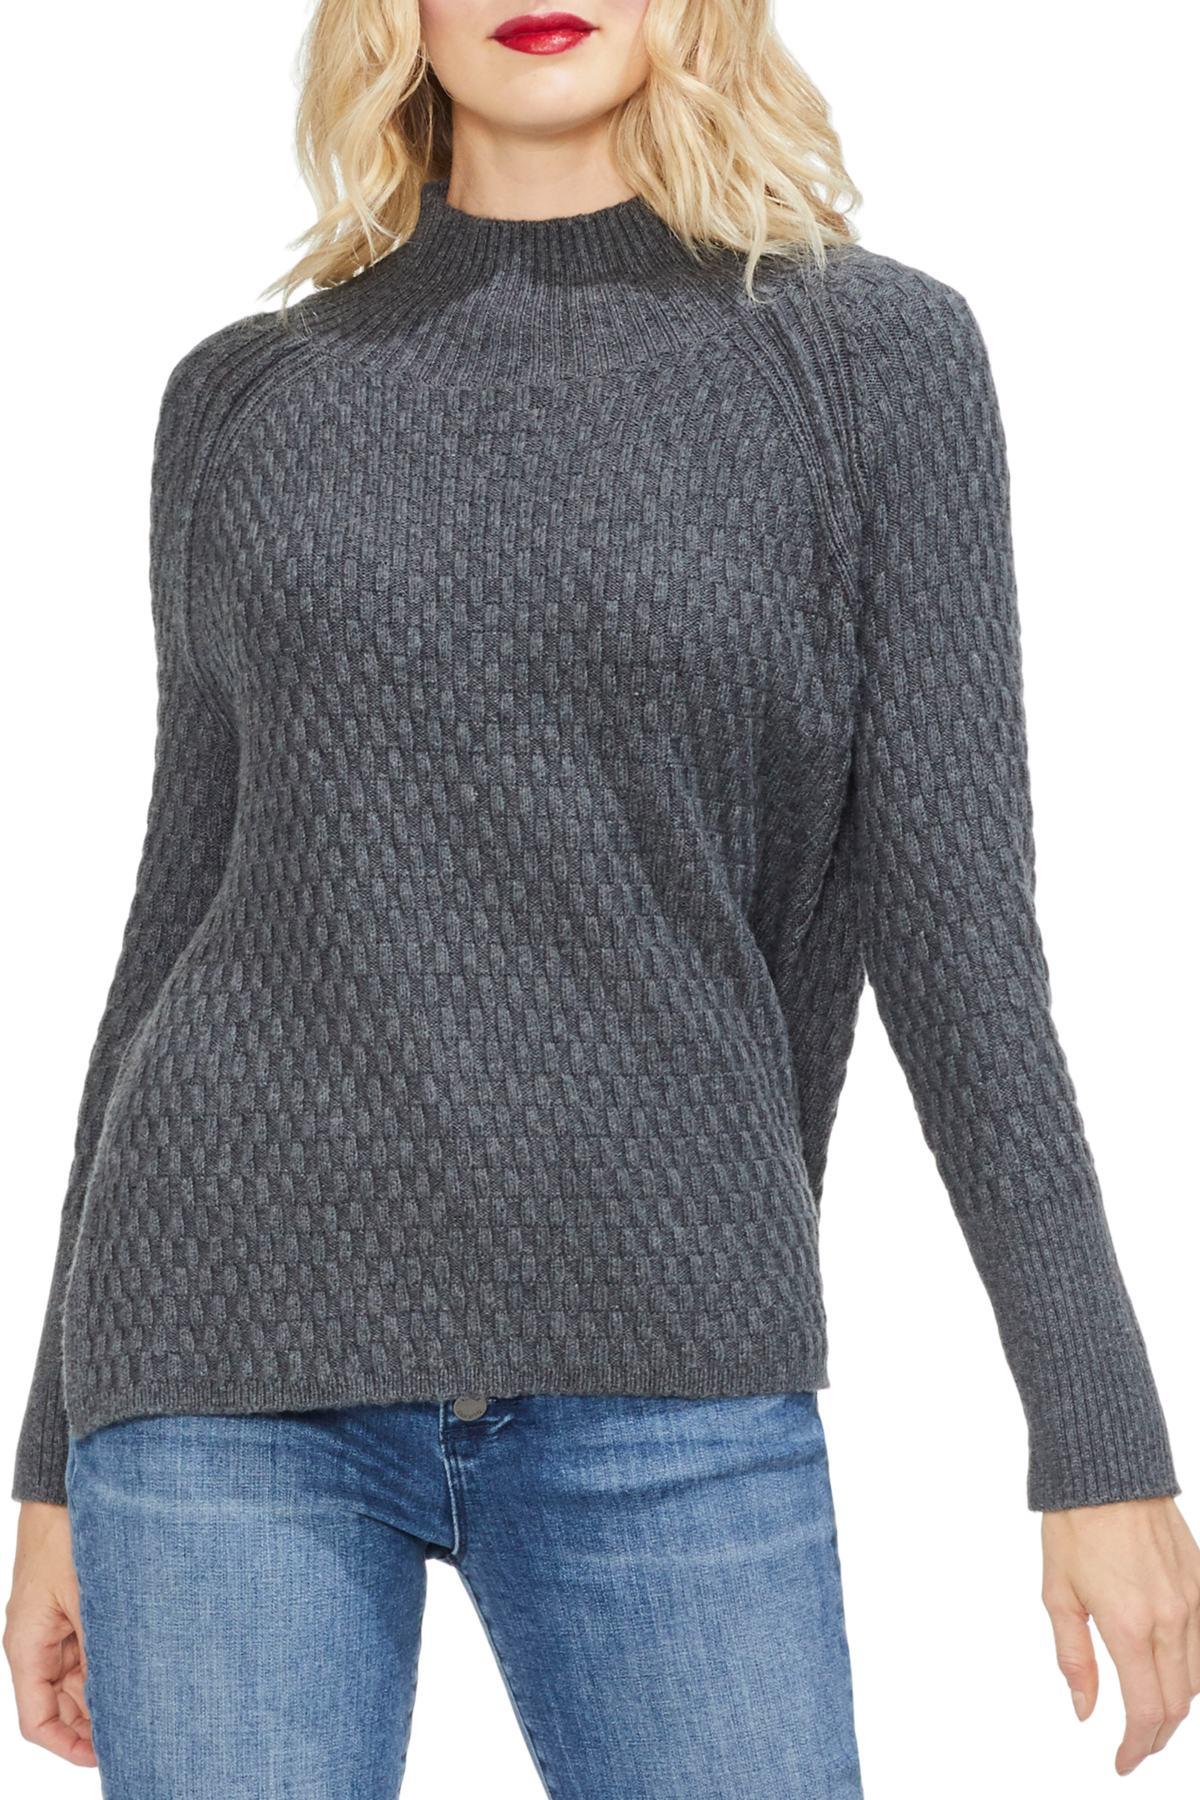 Download Lyst - Vince Camuto Mock Neck Raglan Sweater in Gray ...